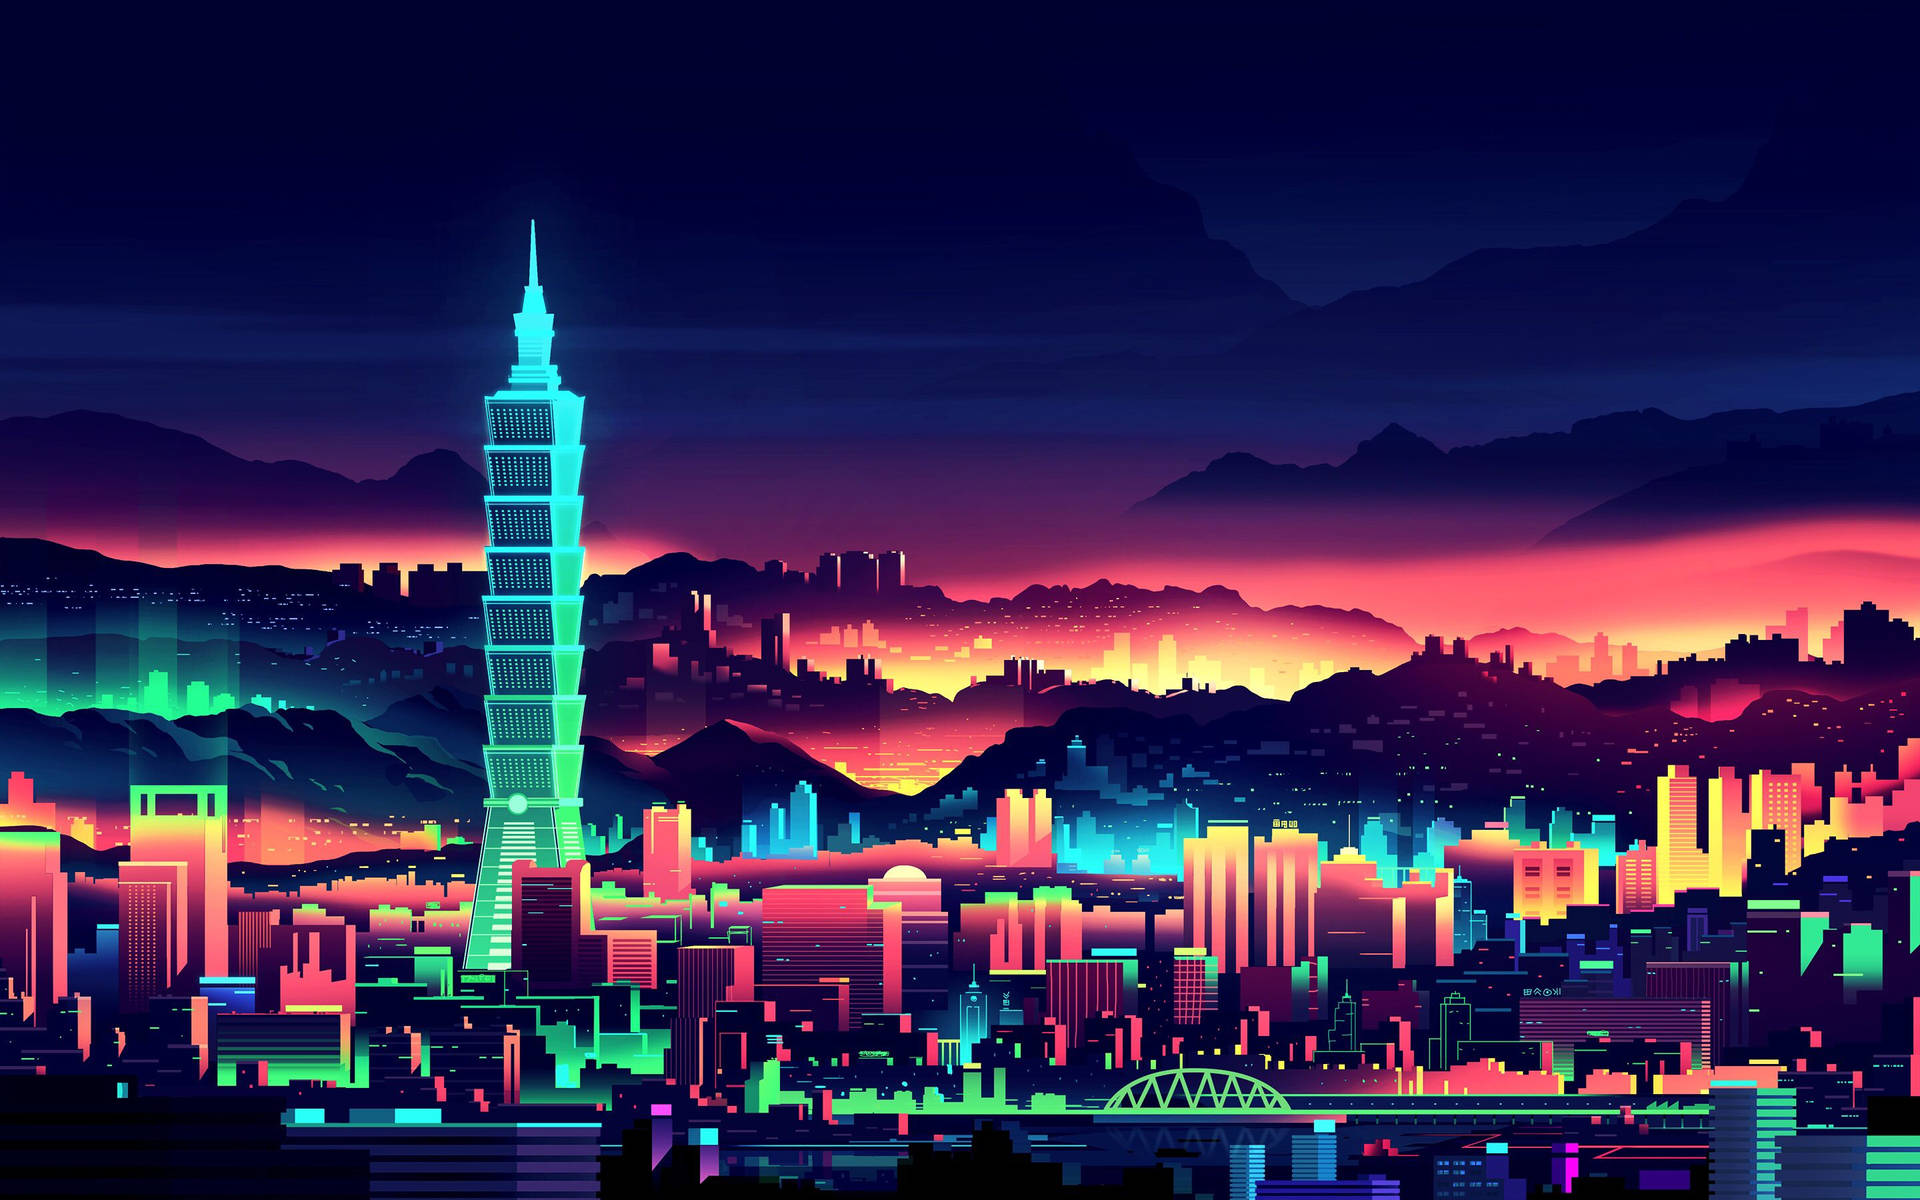 Explore the vibrant and technological nightlife of a cyberpunk city. Wallpaper